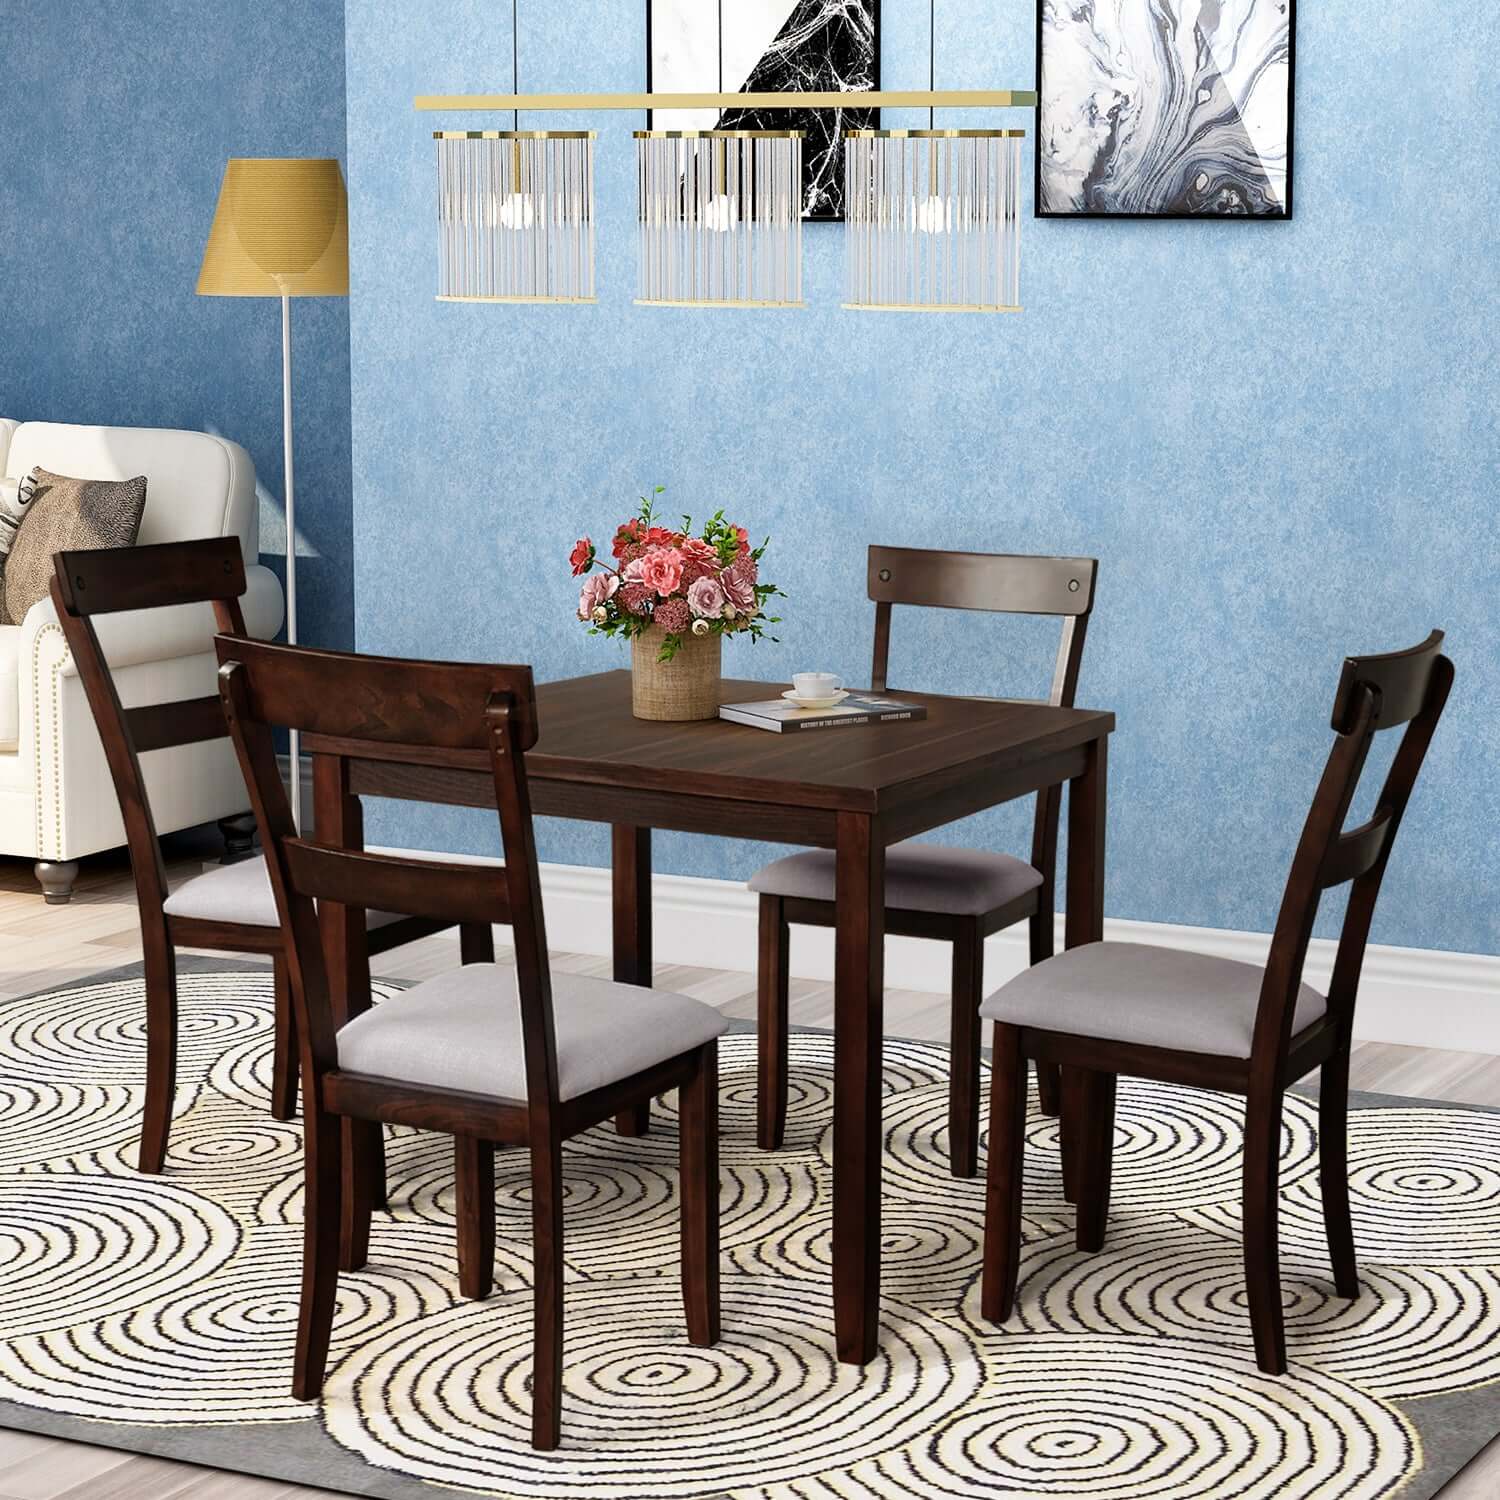 5 Piece Dining Table Set Industrial Wooden Kitchen Table and 4 Espresso Chairs in Modern Dining Room